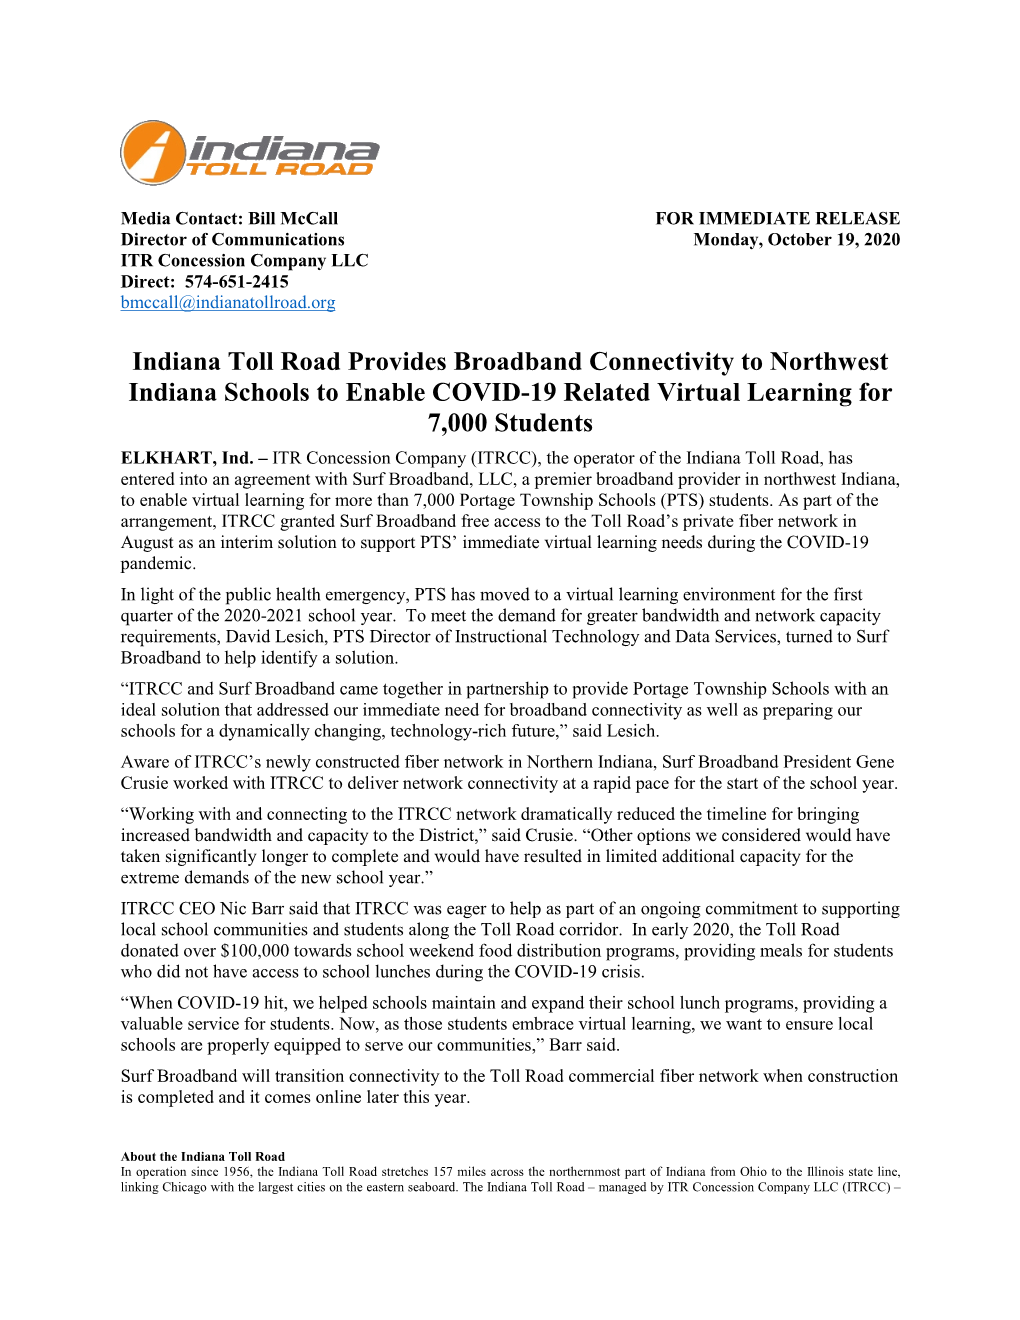 Indiana Toll Road Provides Broadband Connectivity to Northwest Indiana Schools to Enable COVID-19 Related Virtual Learning for 7,000 Students ELKHART, Ind